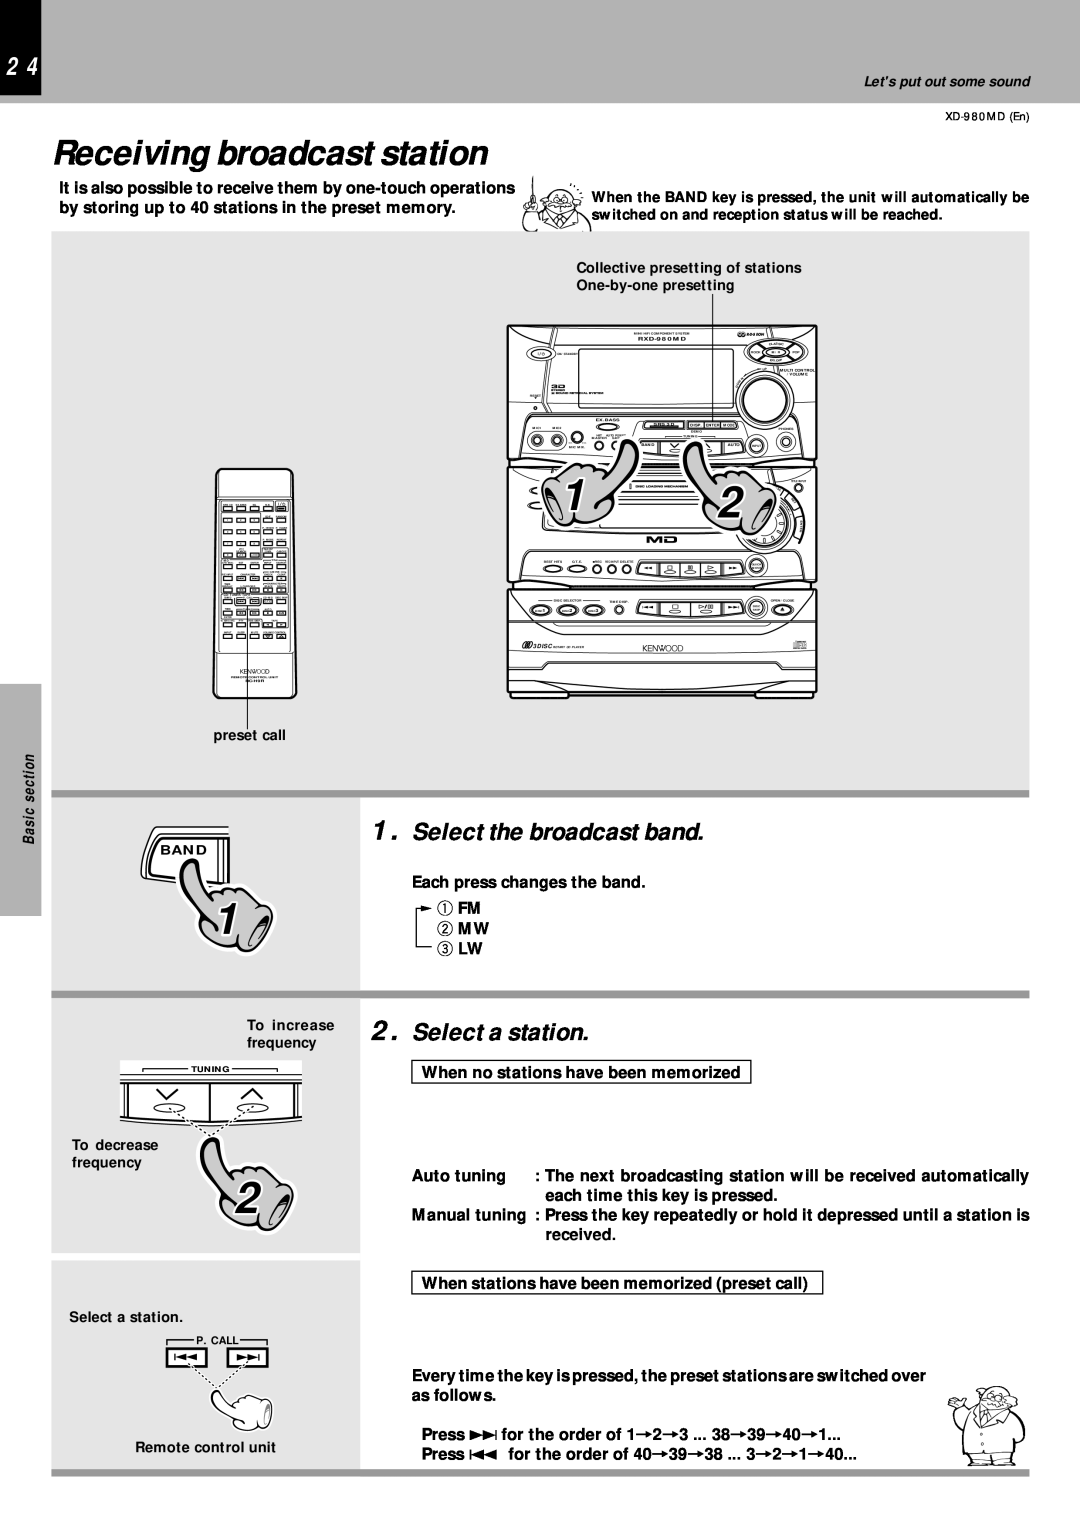 Kenwood XD-980MD instruction manual Receiving broadcast station, Select the broadcast band, Select a station 